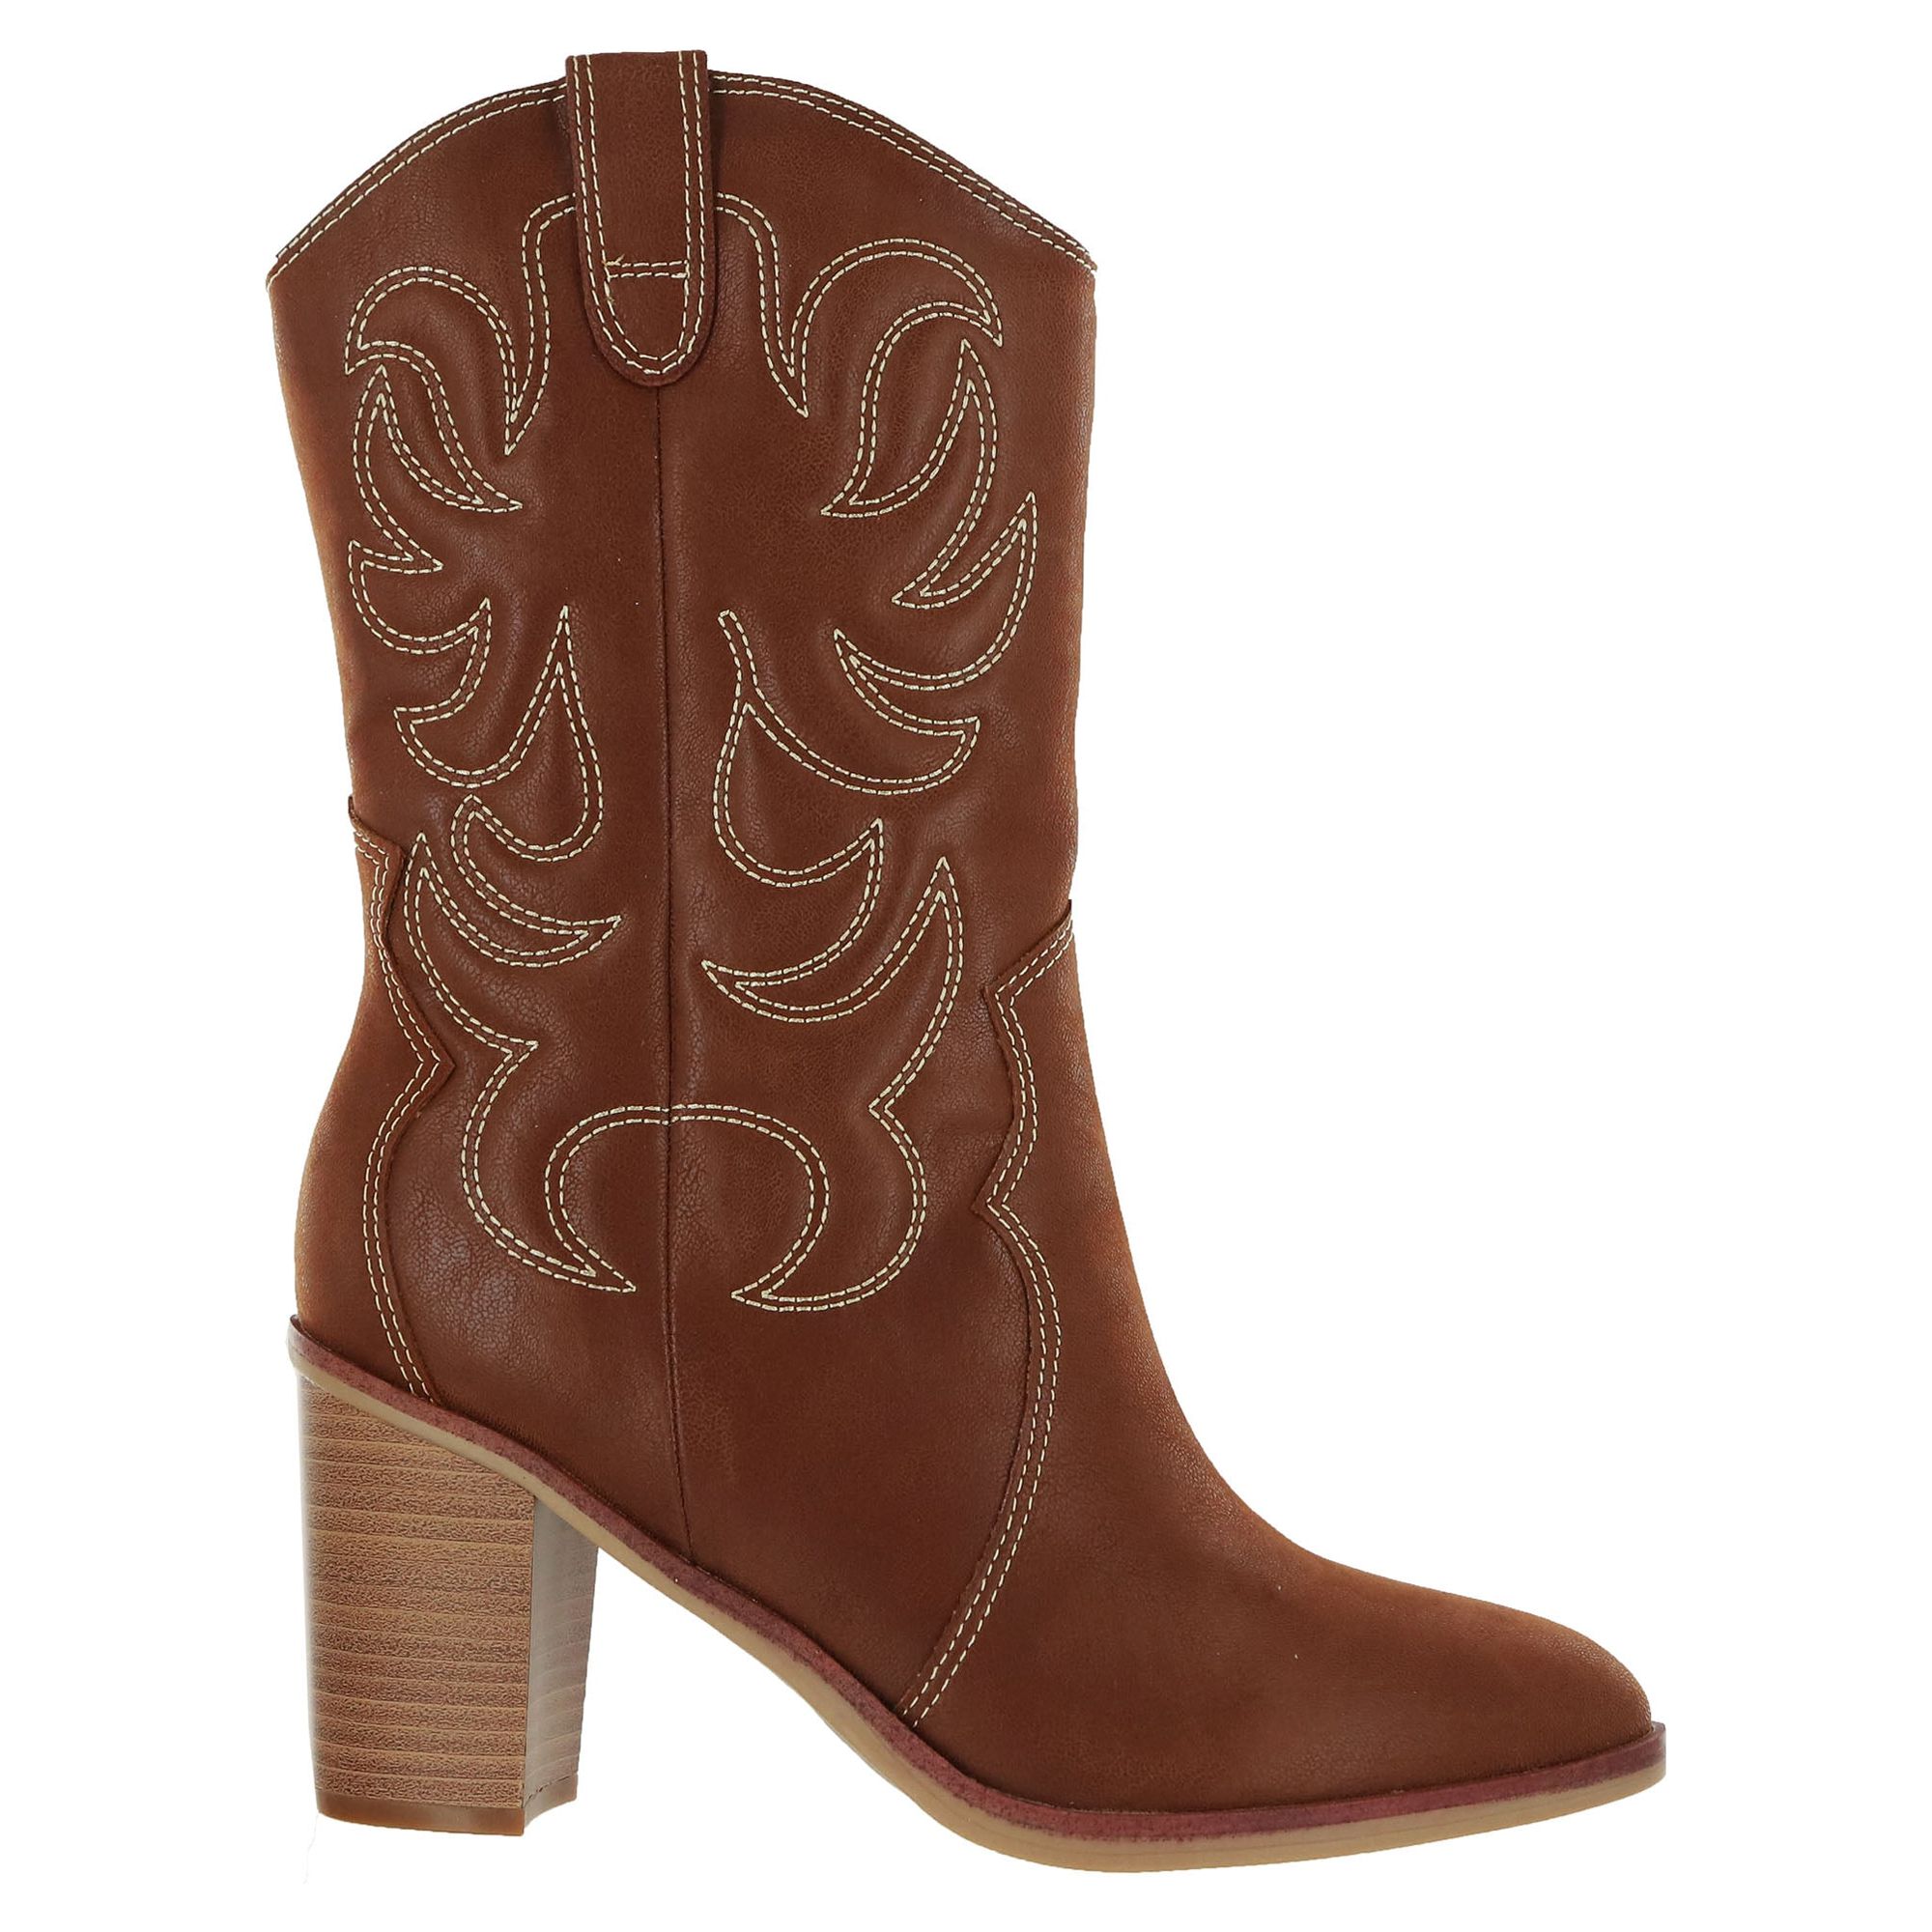 The Pioneer Woman Embroidered Mid-Calf Western Boots, Women's - image 4 of 6